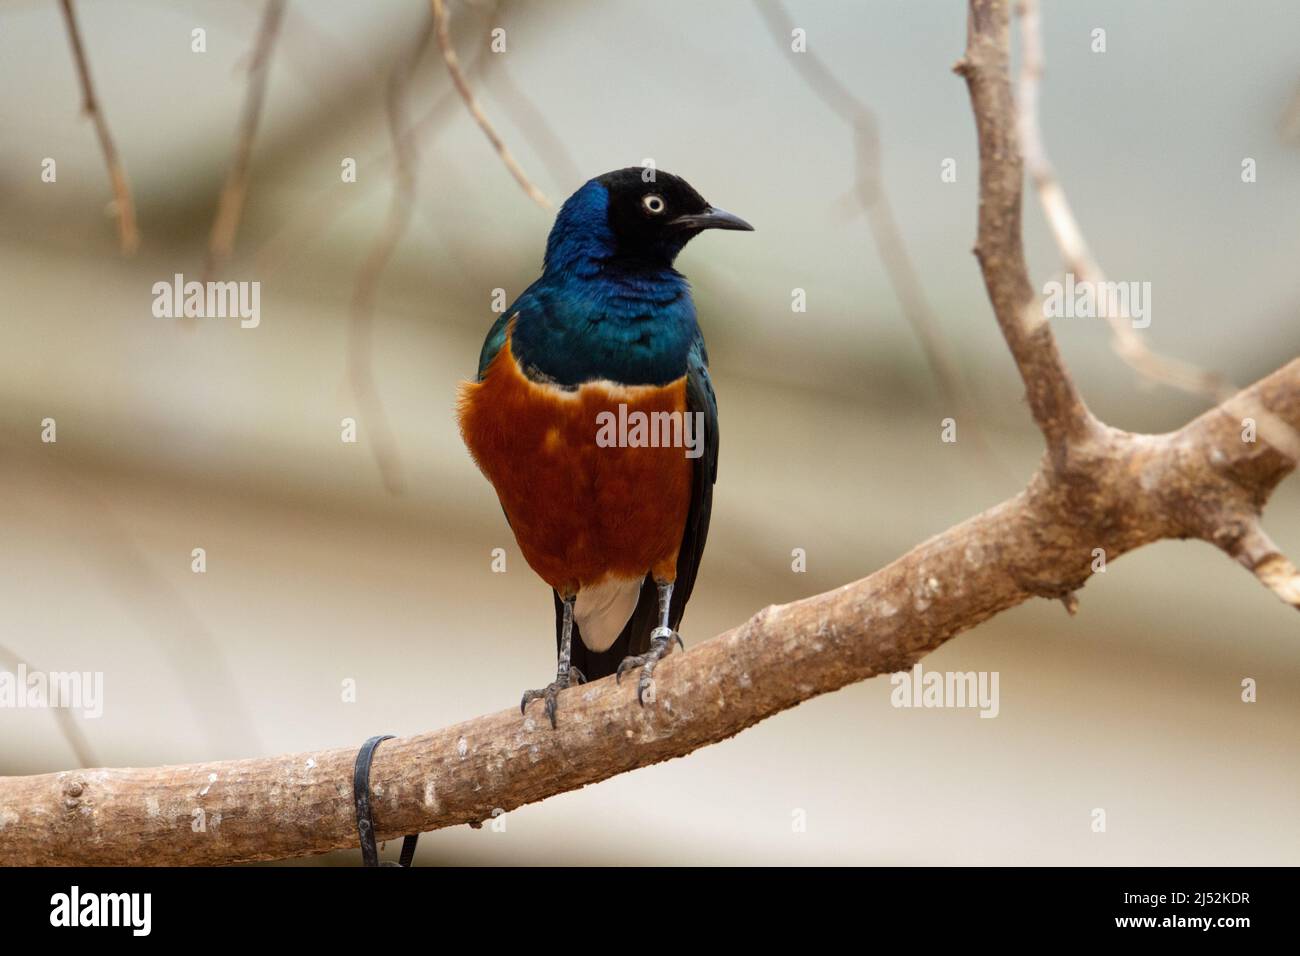 a single chestnut-bellied starling (Lamprotornis pulcher) perched on a branch with a natural desert background Stock Photo